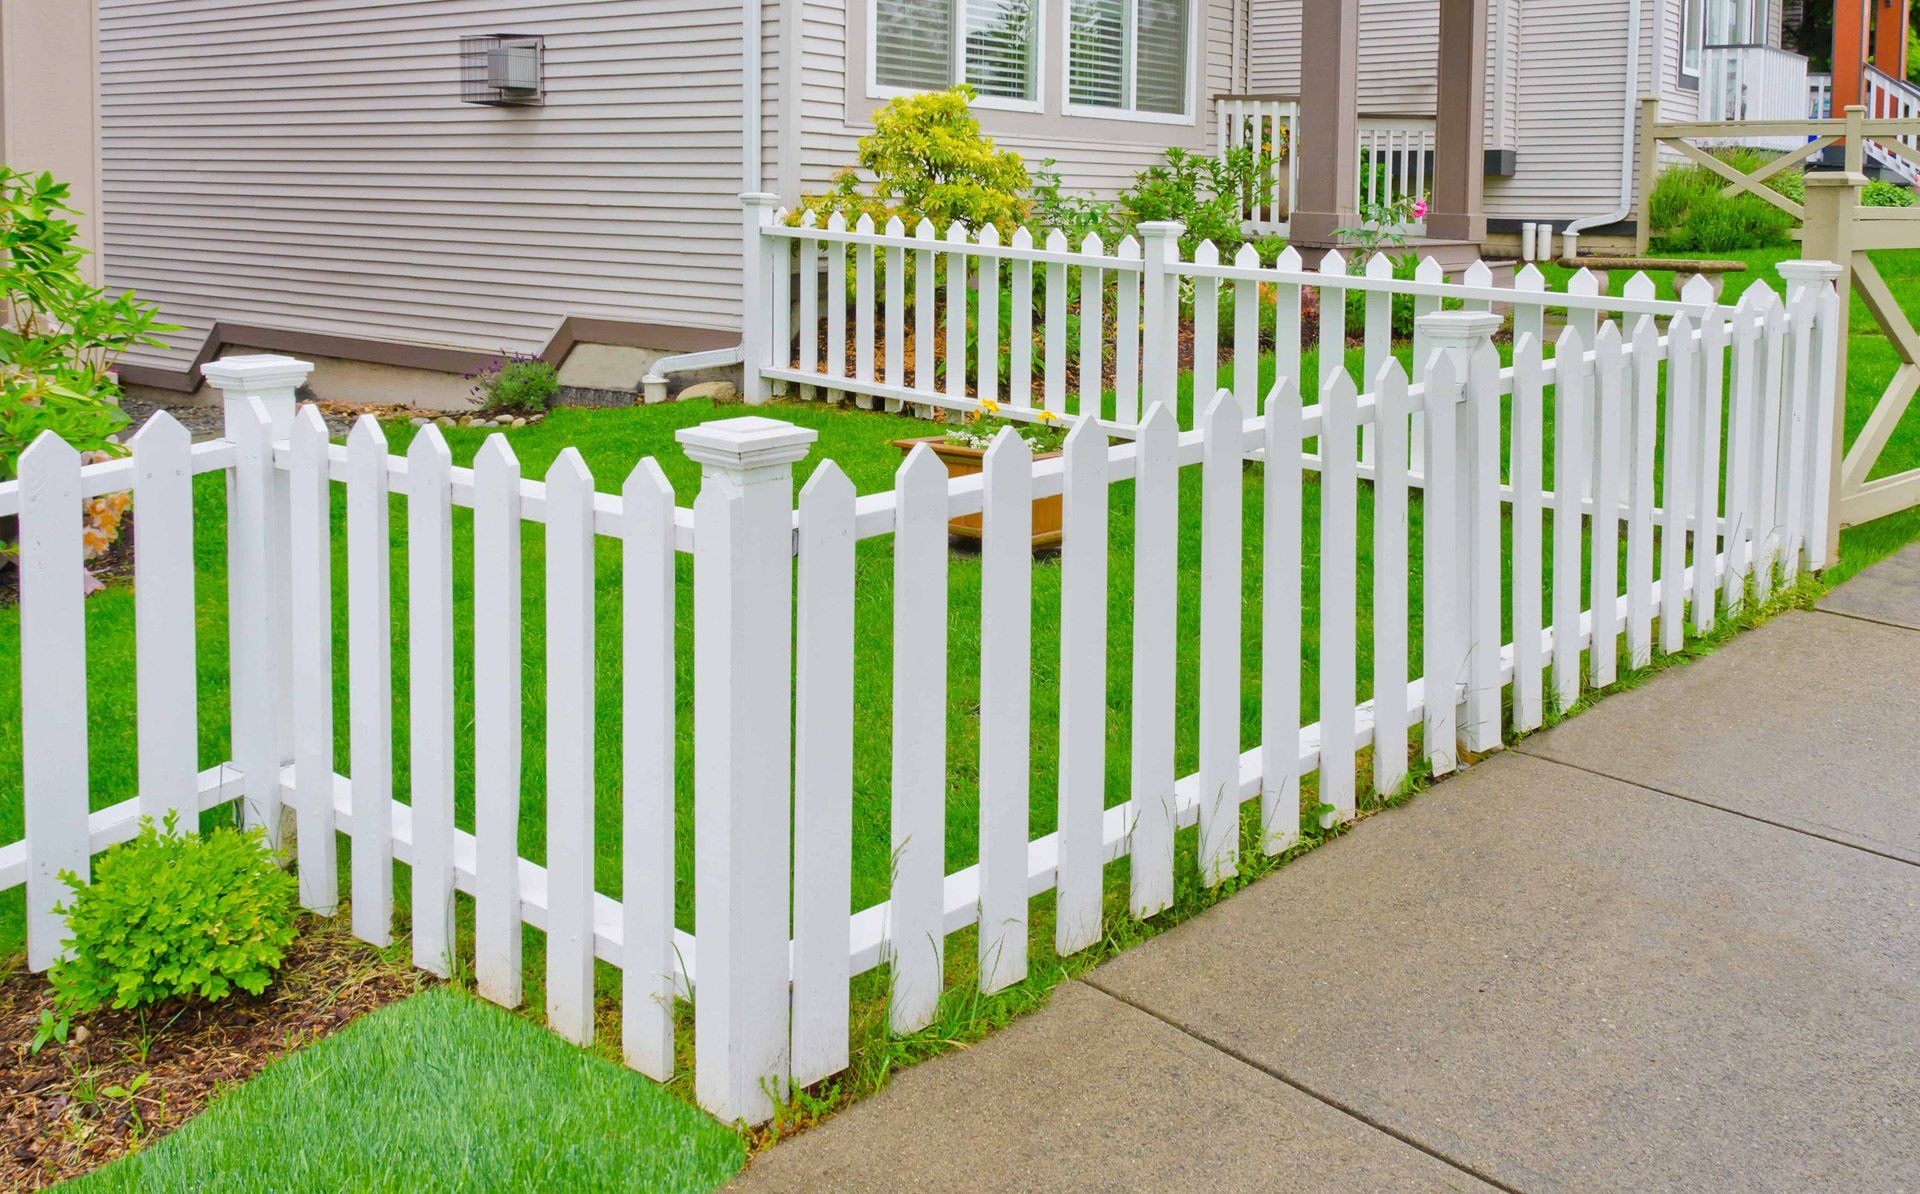 Vinyl fence is a low-maintenance solution